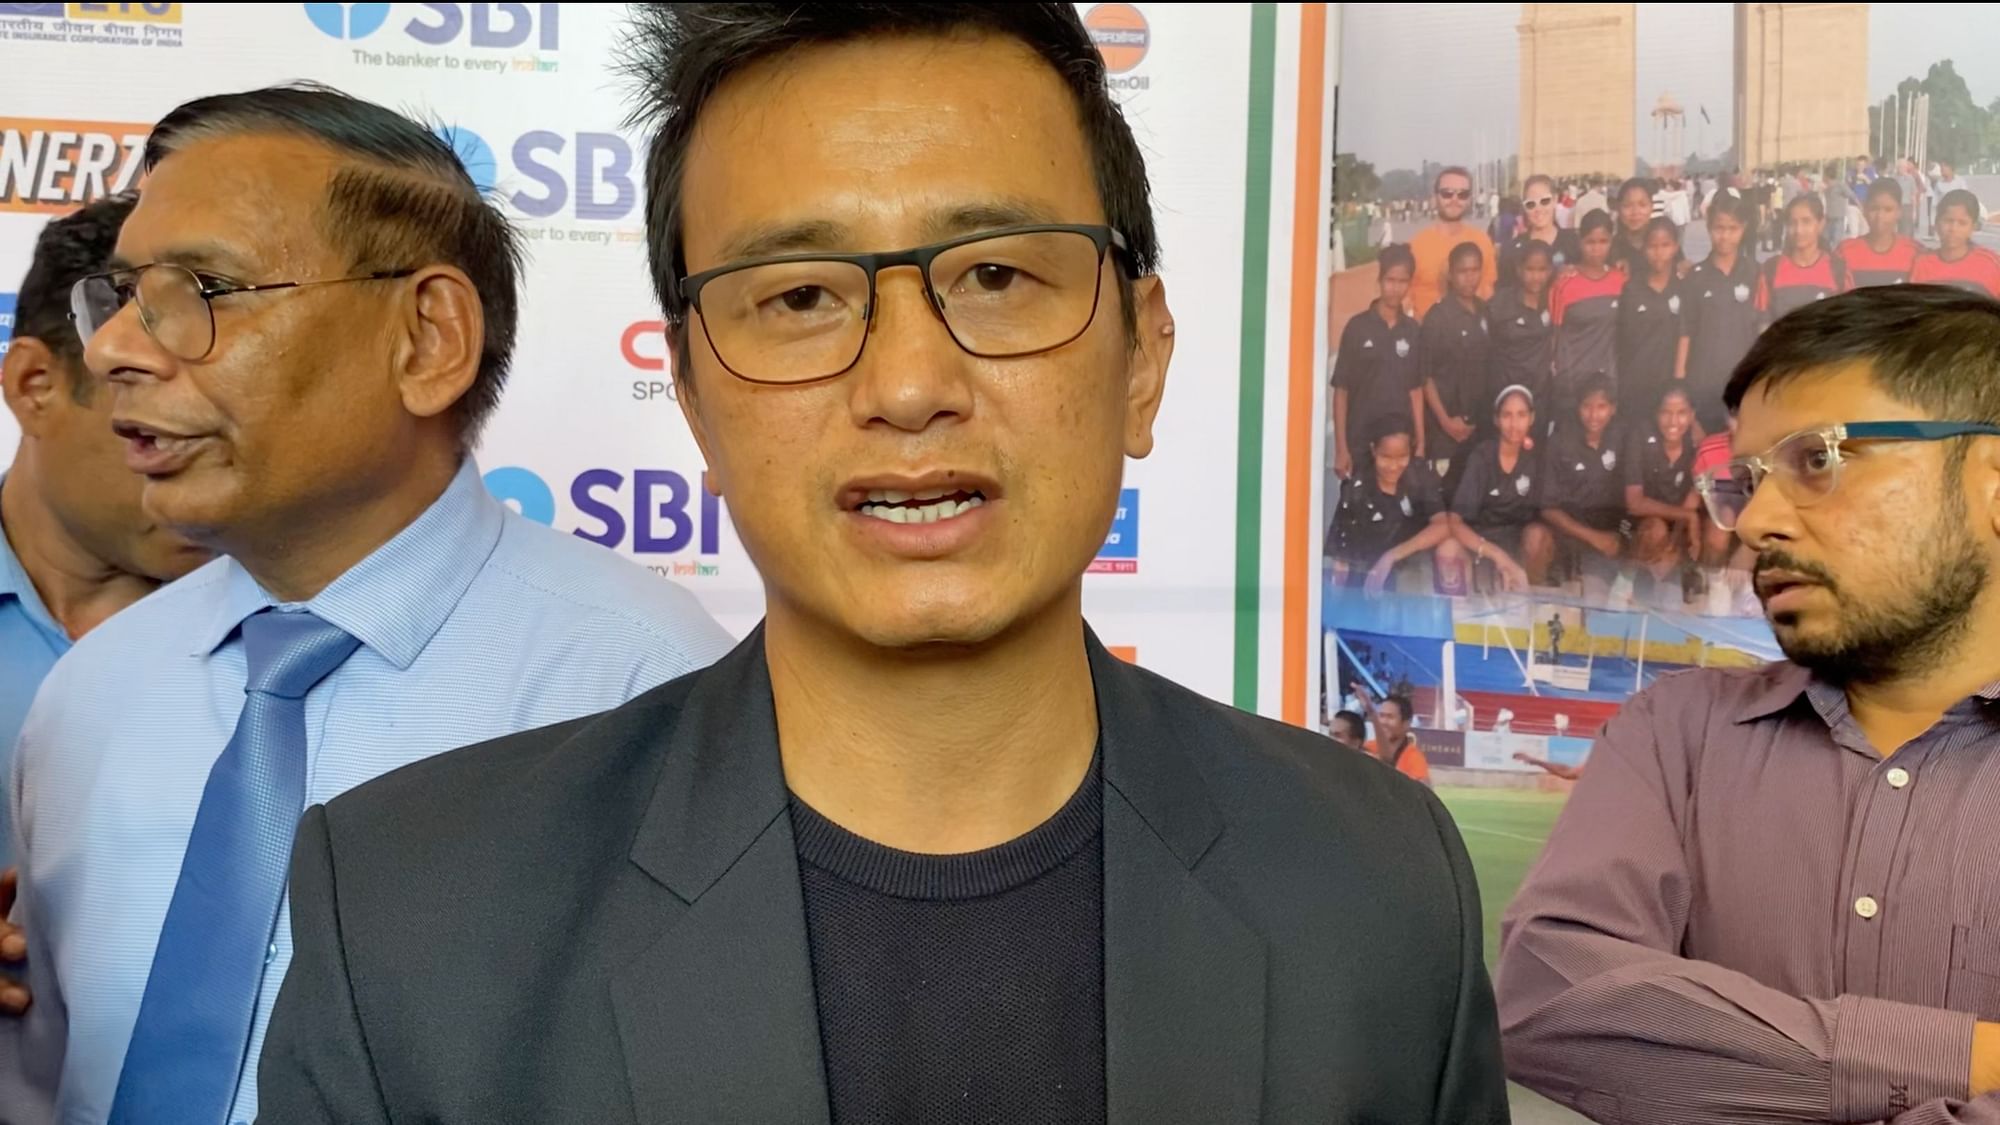 <div class="paragraphs"><p>Bhaichung Bhutia is among two men contesting for the president's post in the AIFF election.</p></div>